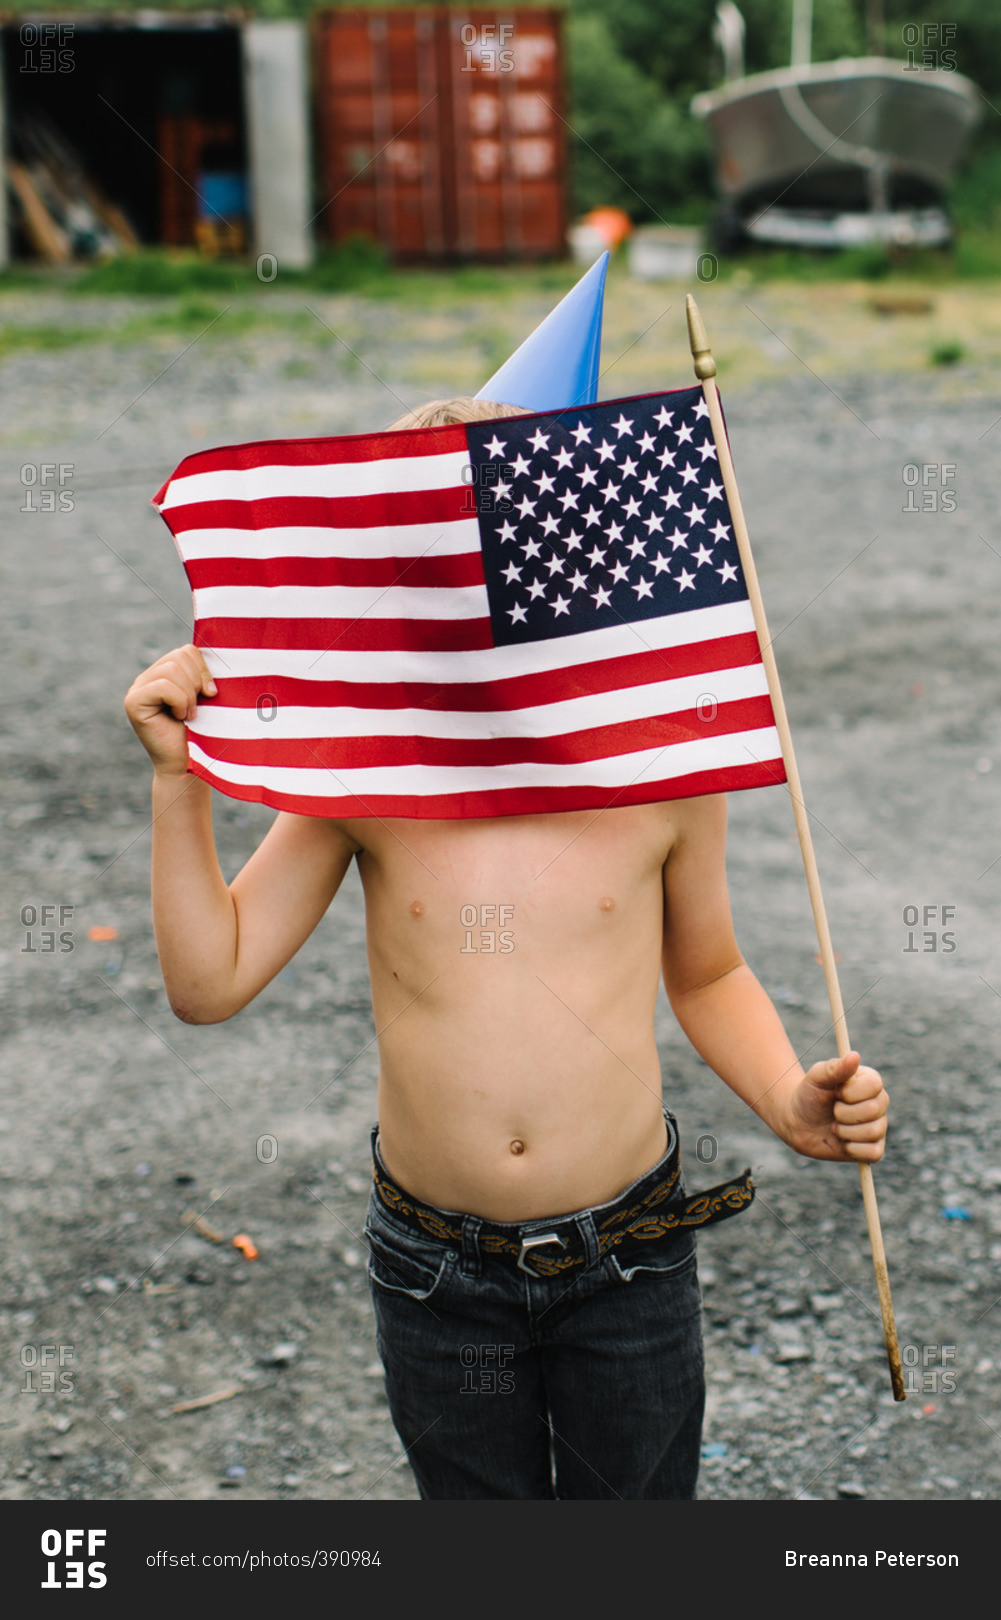 Boy wearing a birthday hat holding the American flag